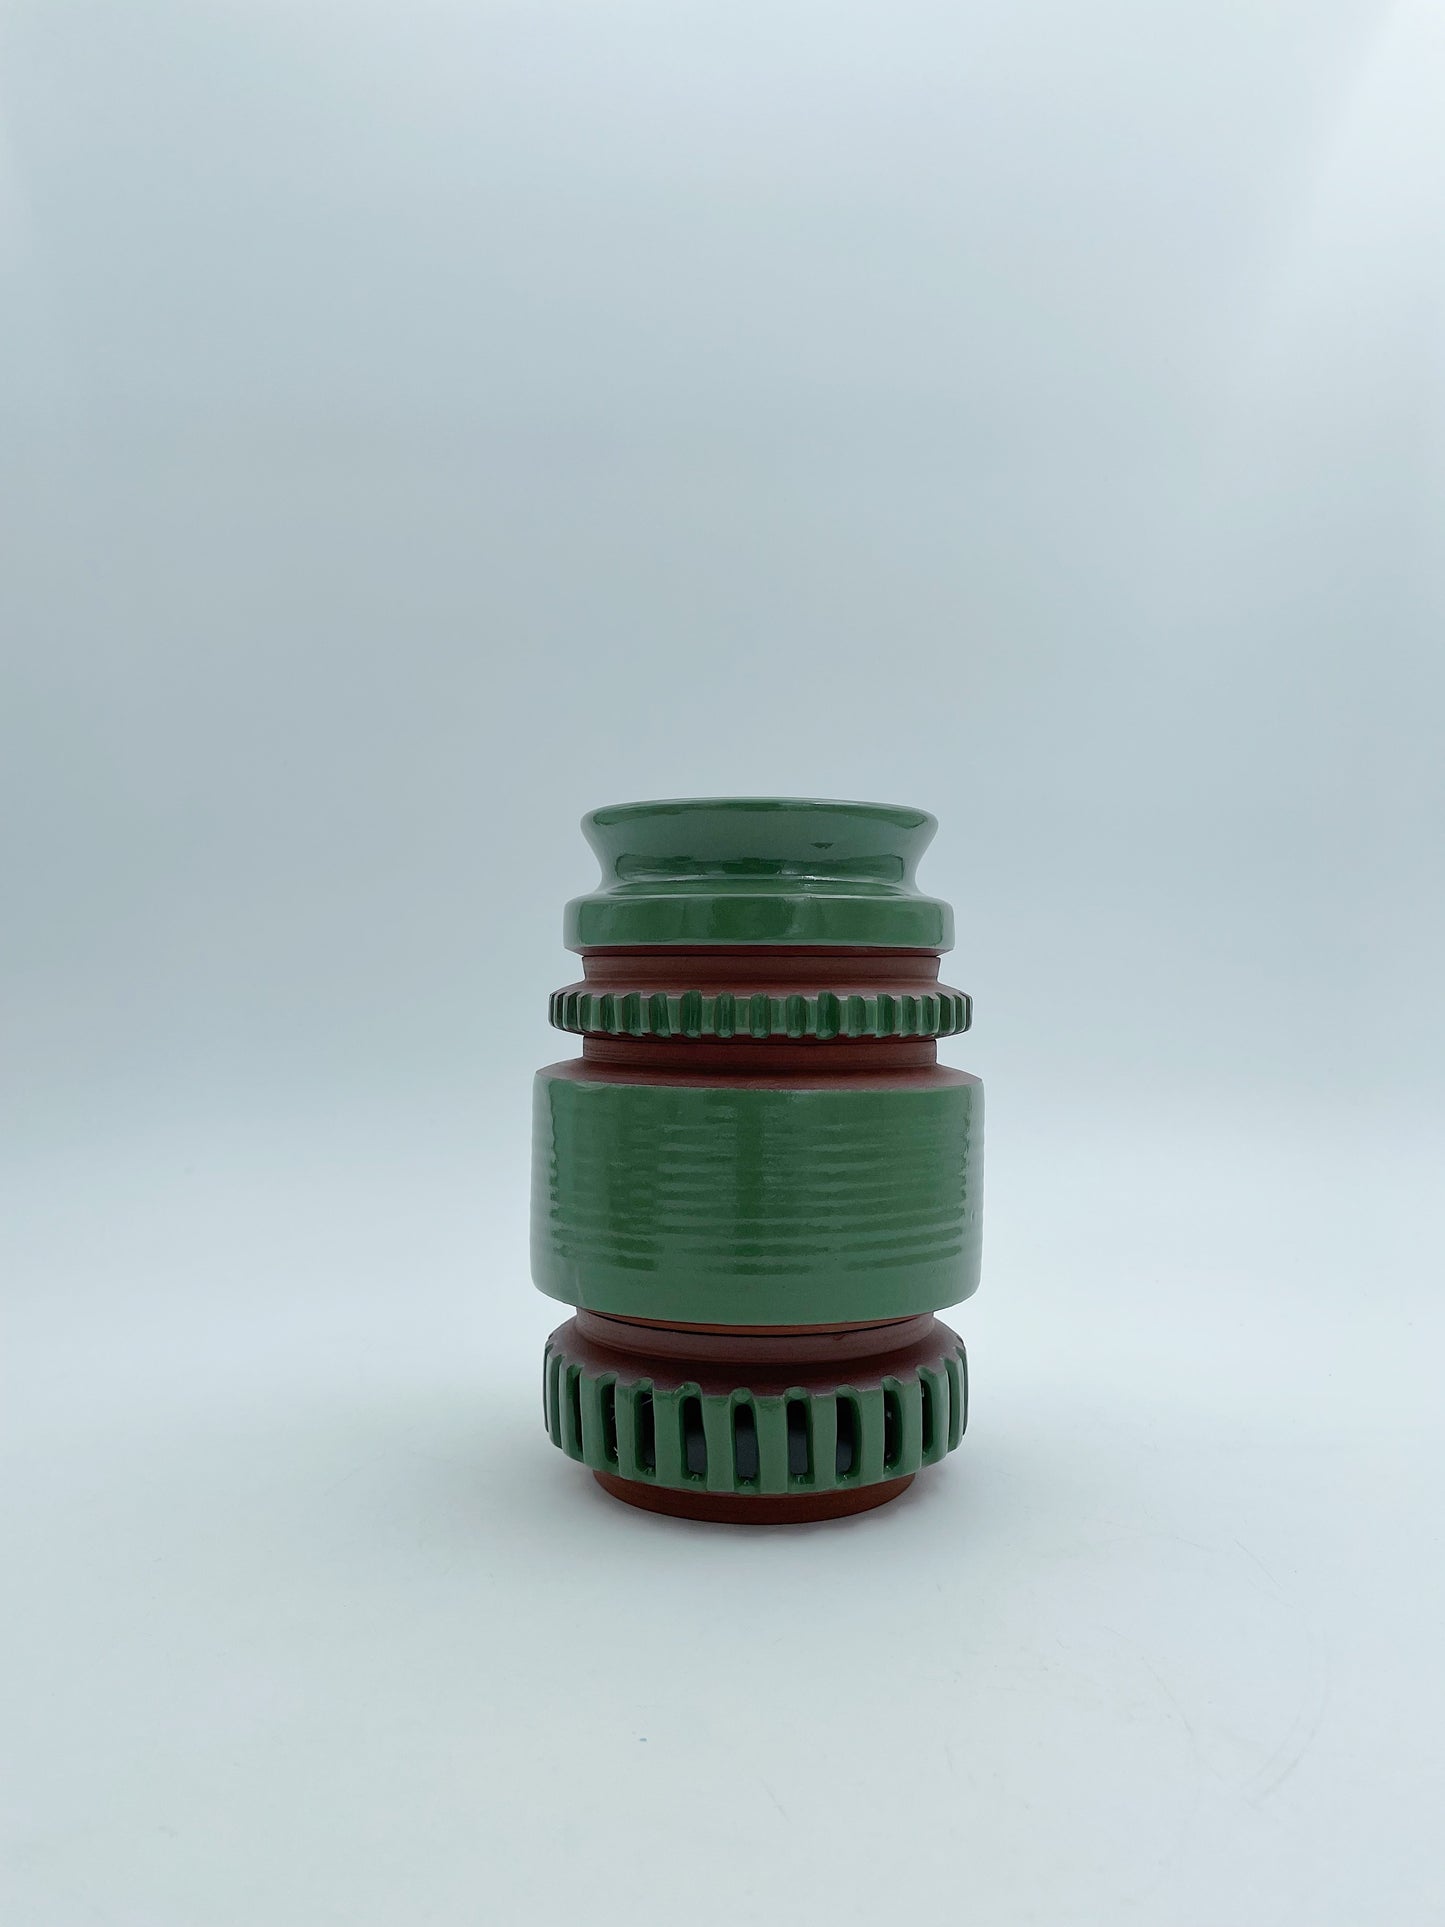 Stacking Vessel